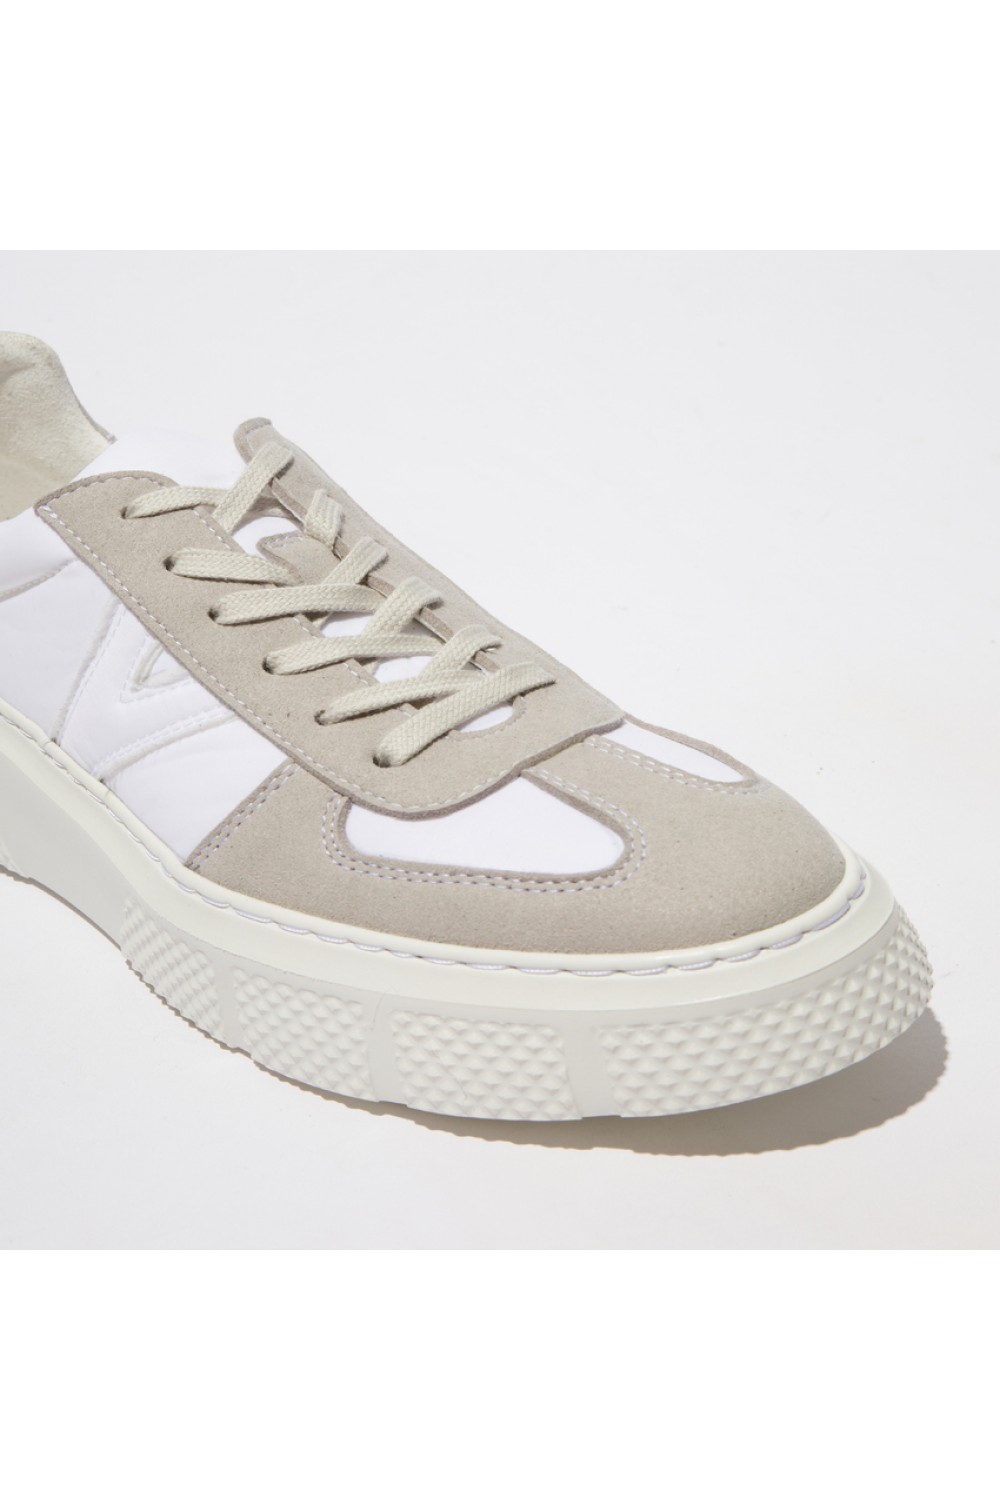 FLY LONDON Essa511 Chunky Trainer White Lilac